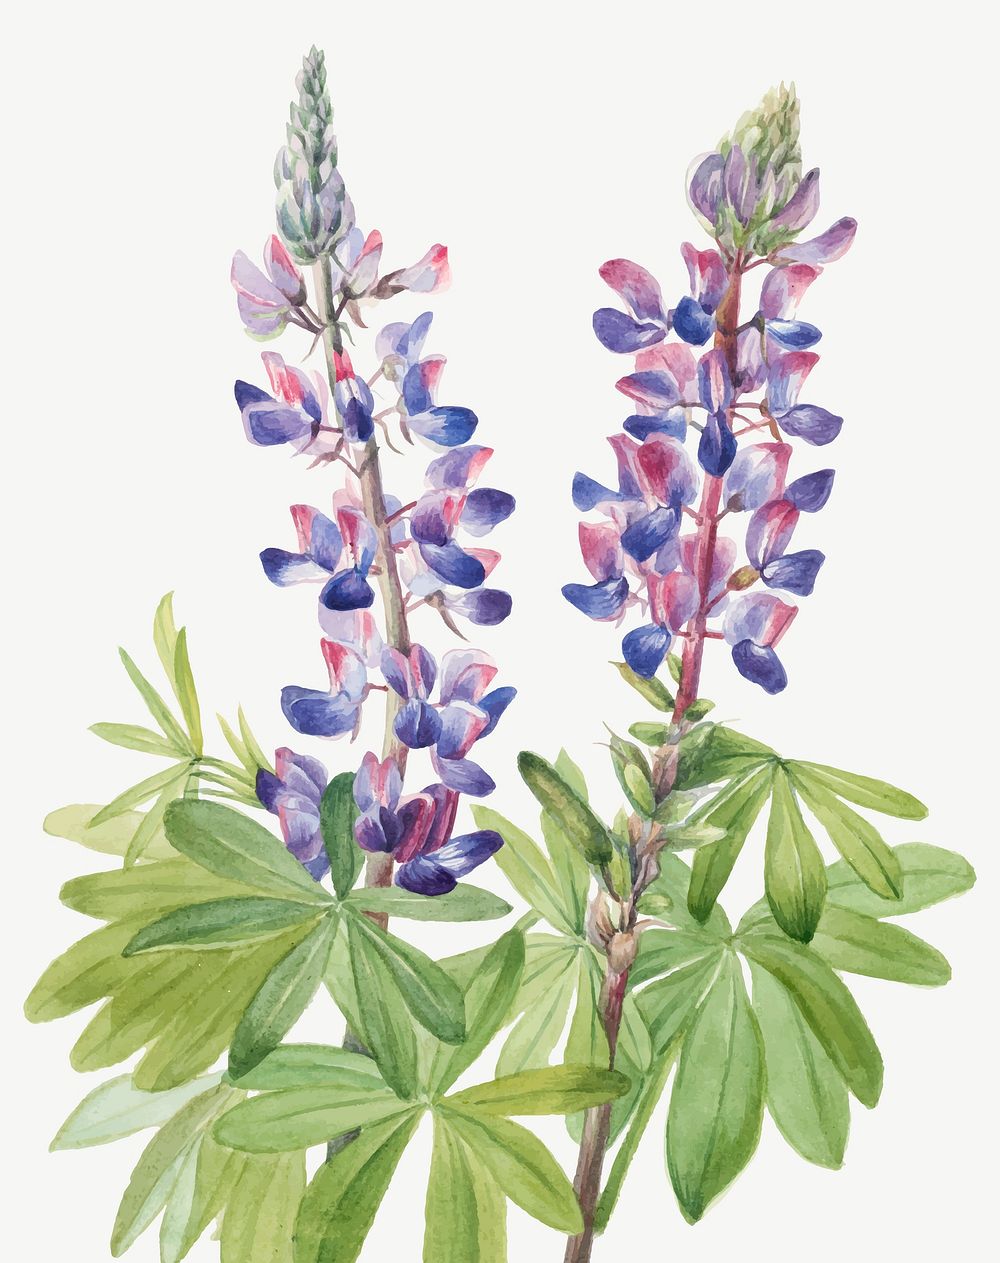 Lupine flower botanical illustration, remixed from the artworks by Mary Vaux Walcott